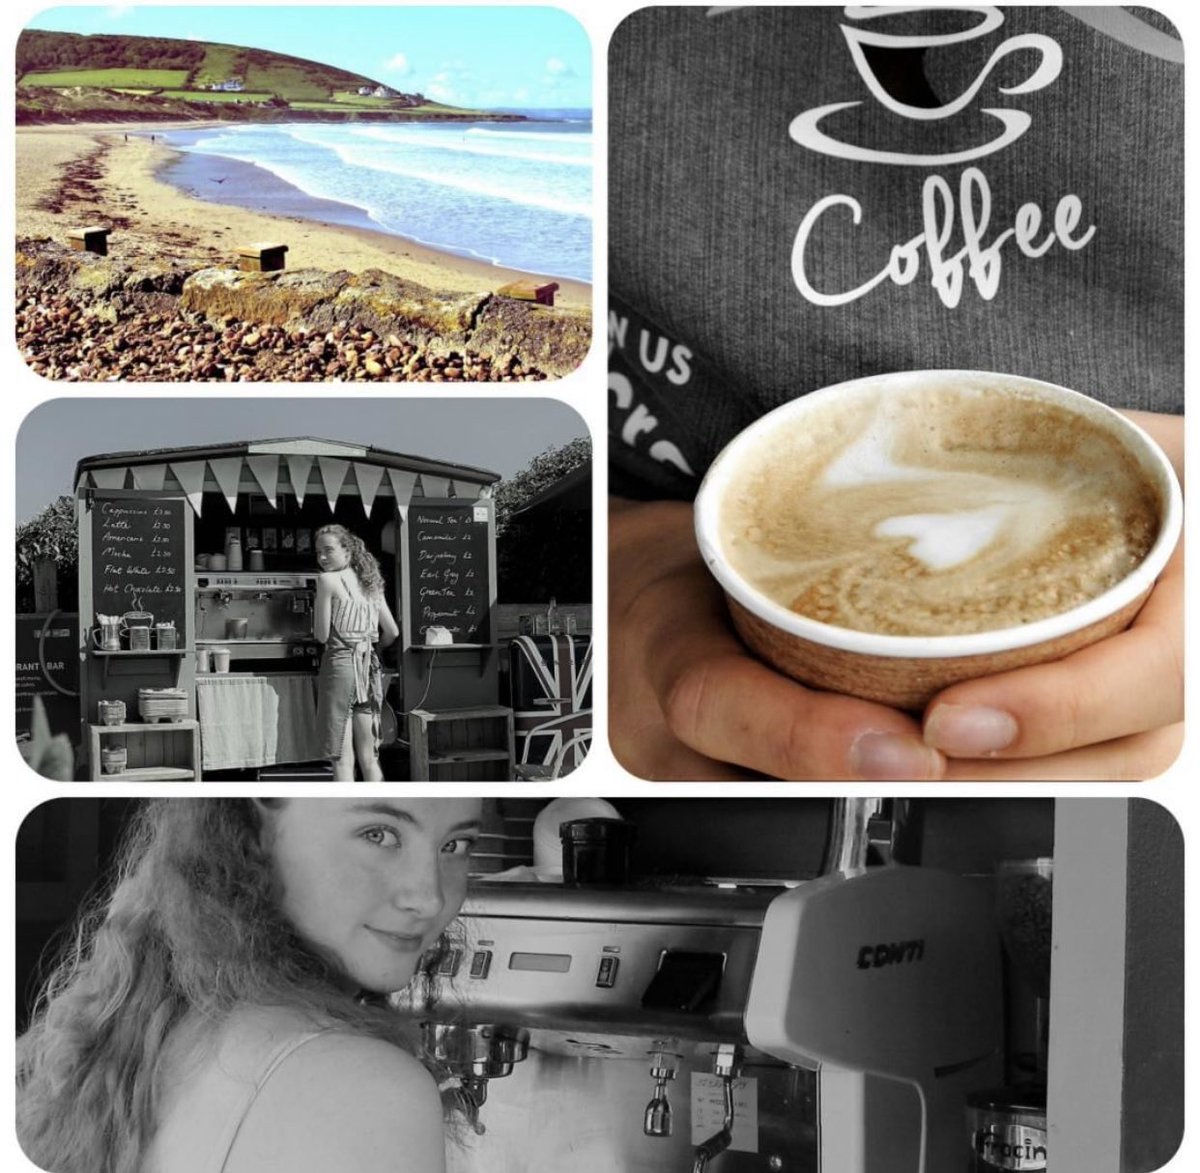 We're OPEN in Beach Road from Friday 21st over the weekend for the Oceanfest, yeah! See you there! #croyde #croydecoffee #coffeehut #coffeecart #beachroad #croydebeach #croydebay @unionroasted @shibuitea @goldcoastoceanfest